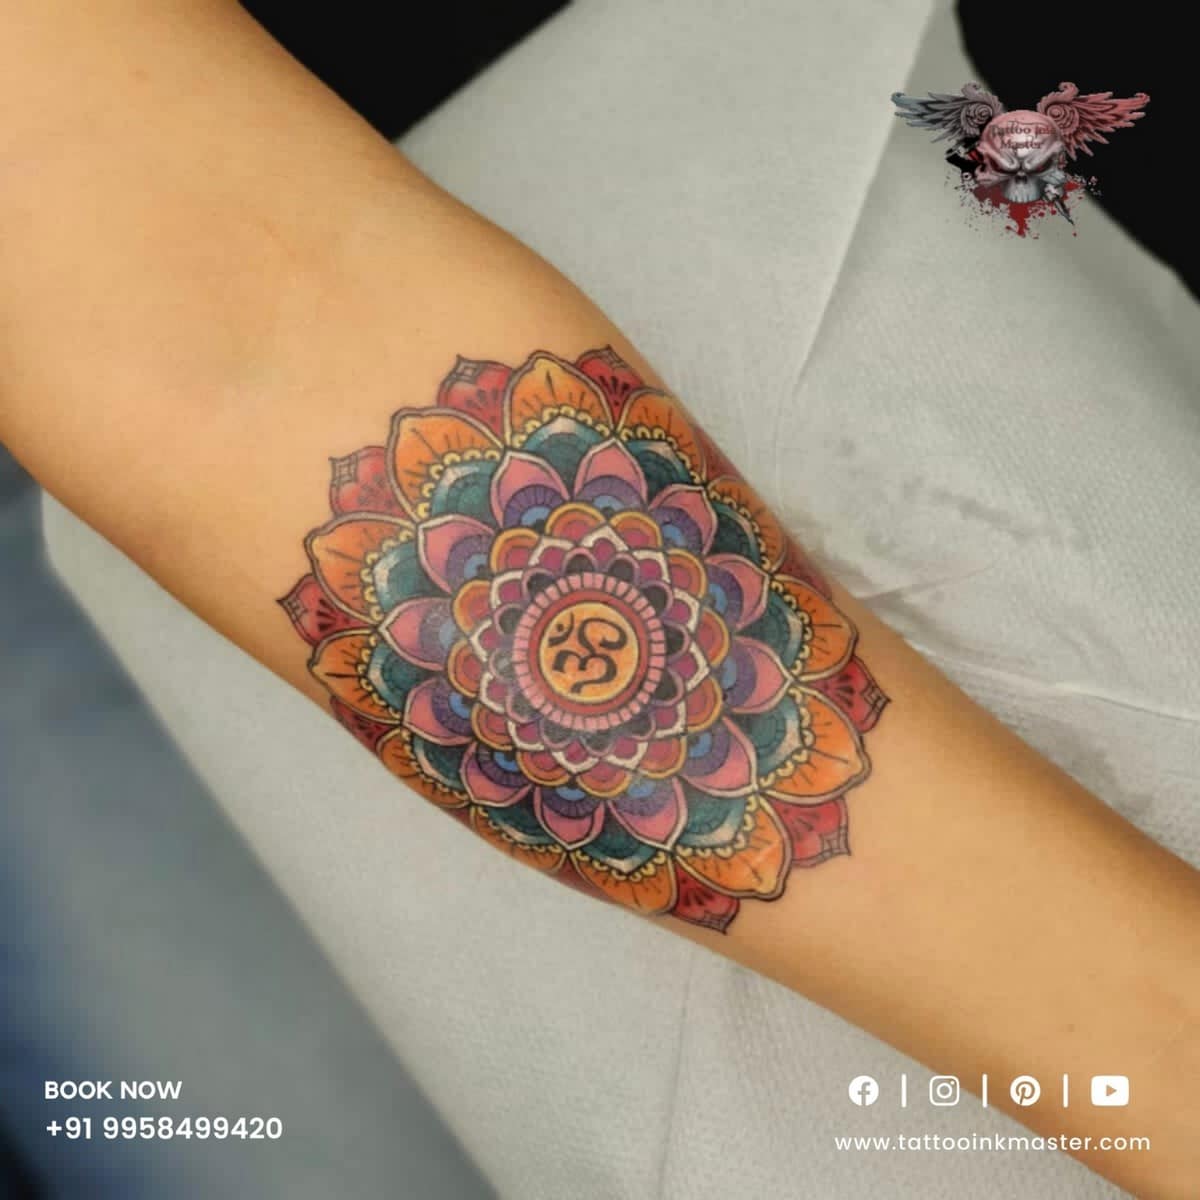 19,309 Chakra Tattoo Royalty-Free Photos and Stock Images | Shutterstock